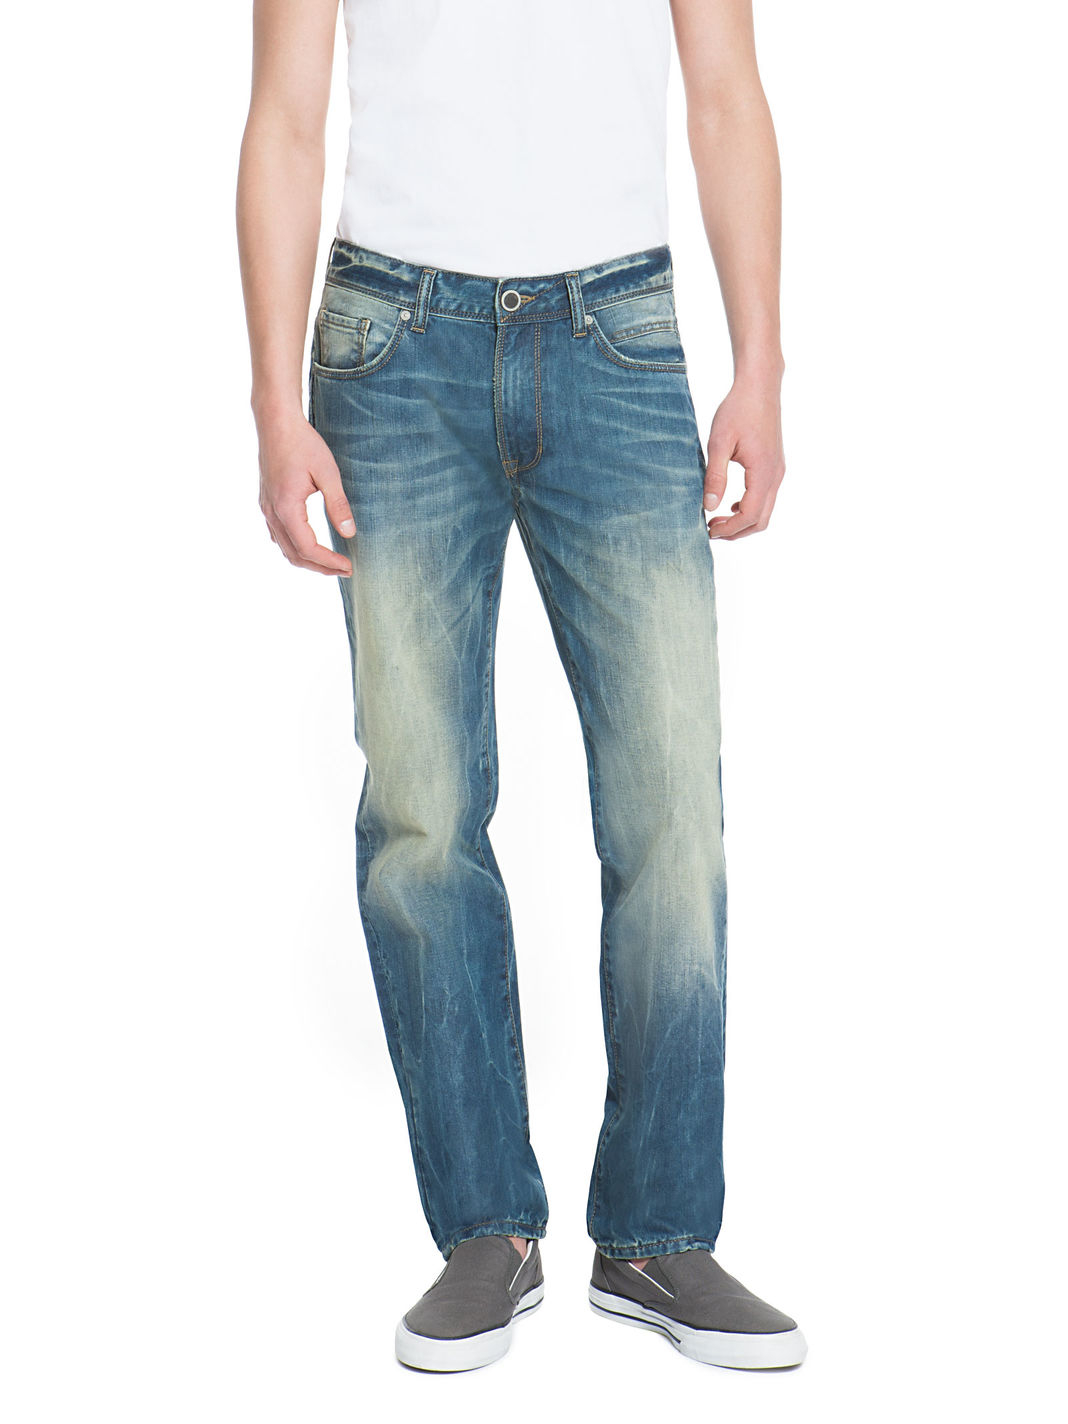 Lyst - Dkny Soho Relaxed-Fit Jeans in Blue for Men